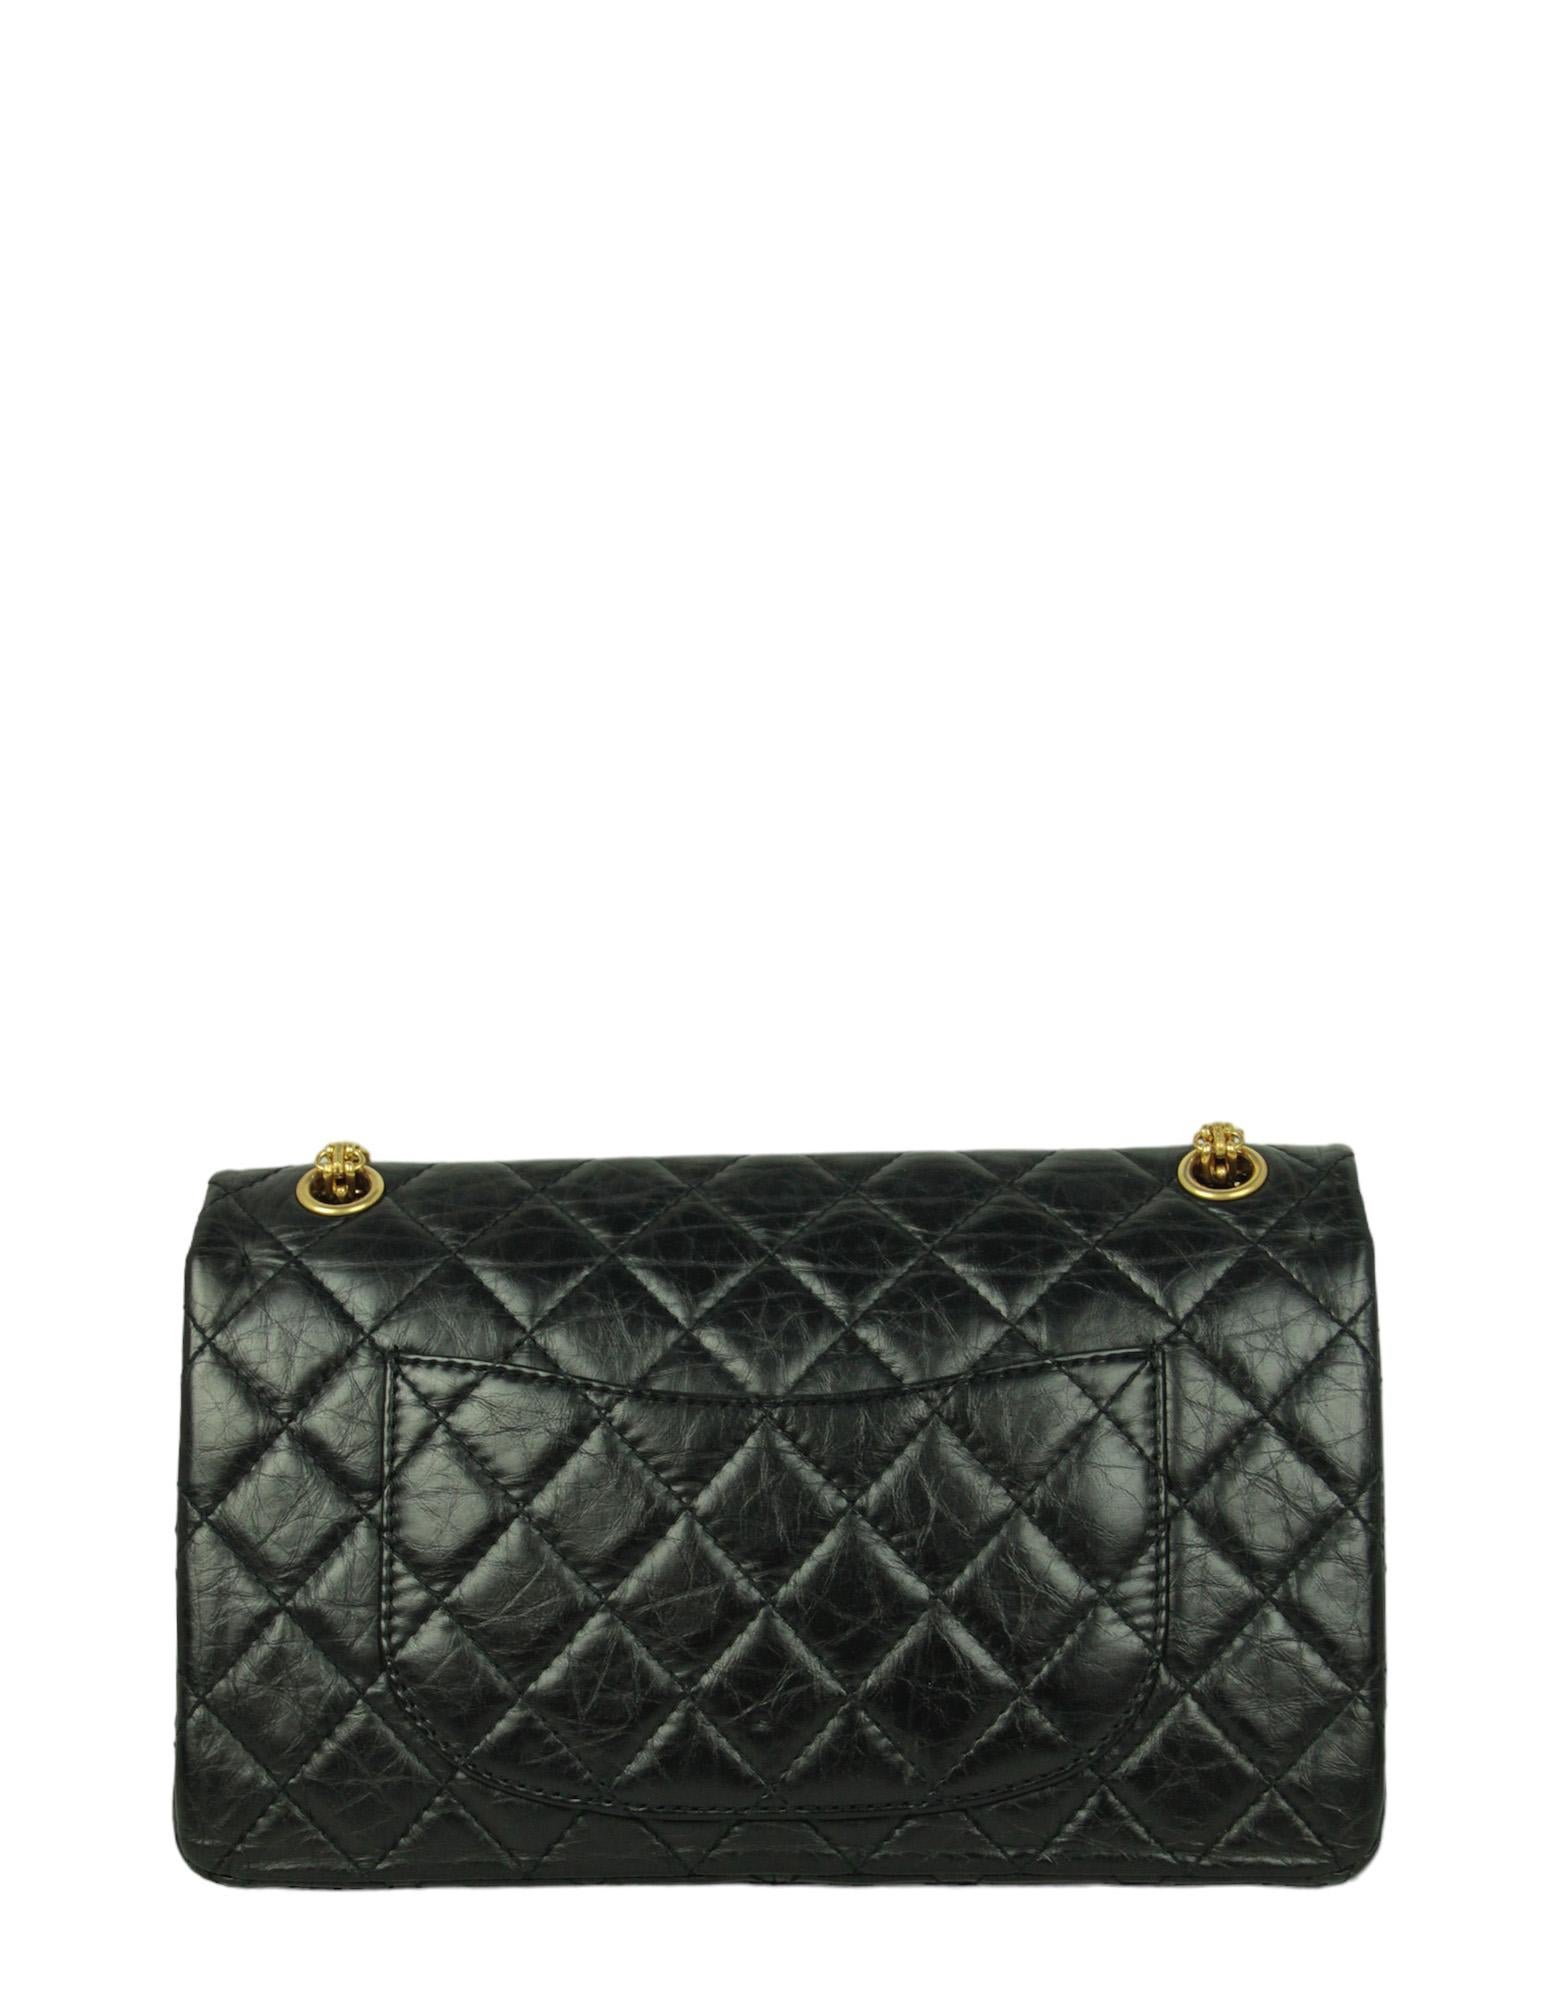 Women's Chanel Black Calfskin Leather Quilted 2.55 Reissue 226 Flap Bag For Sale